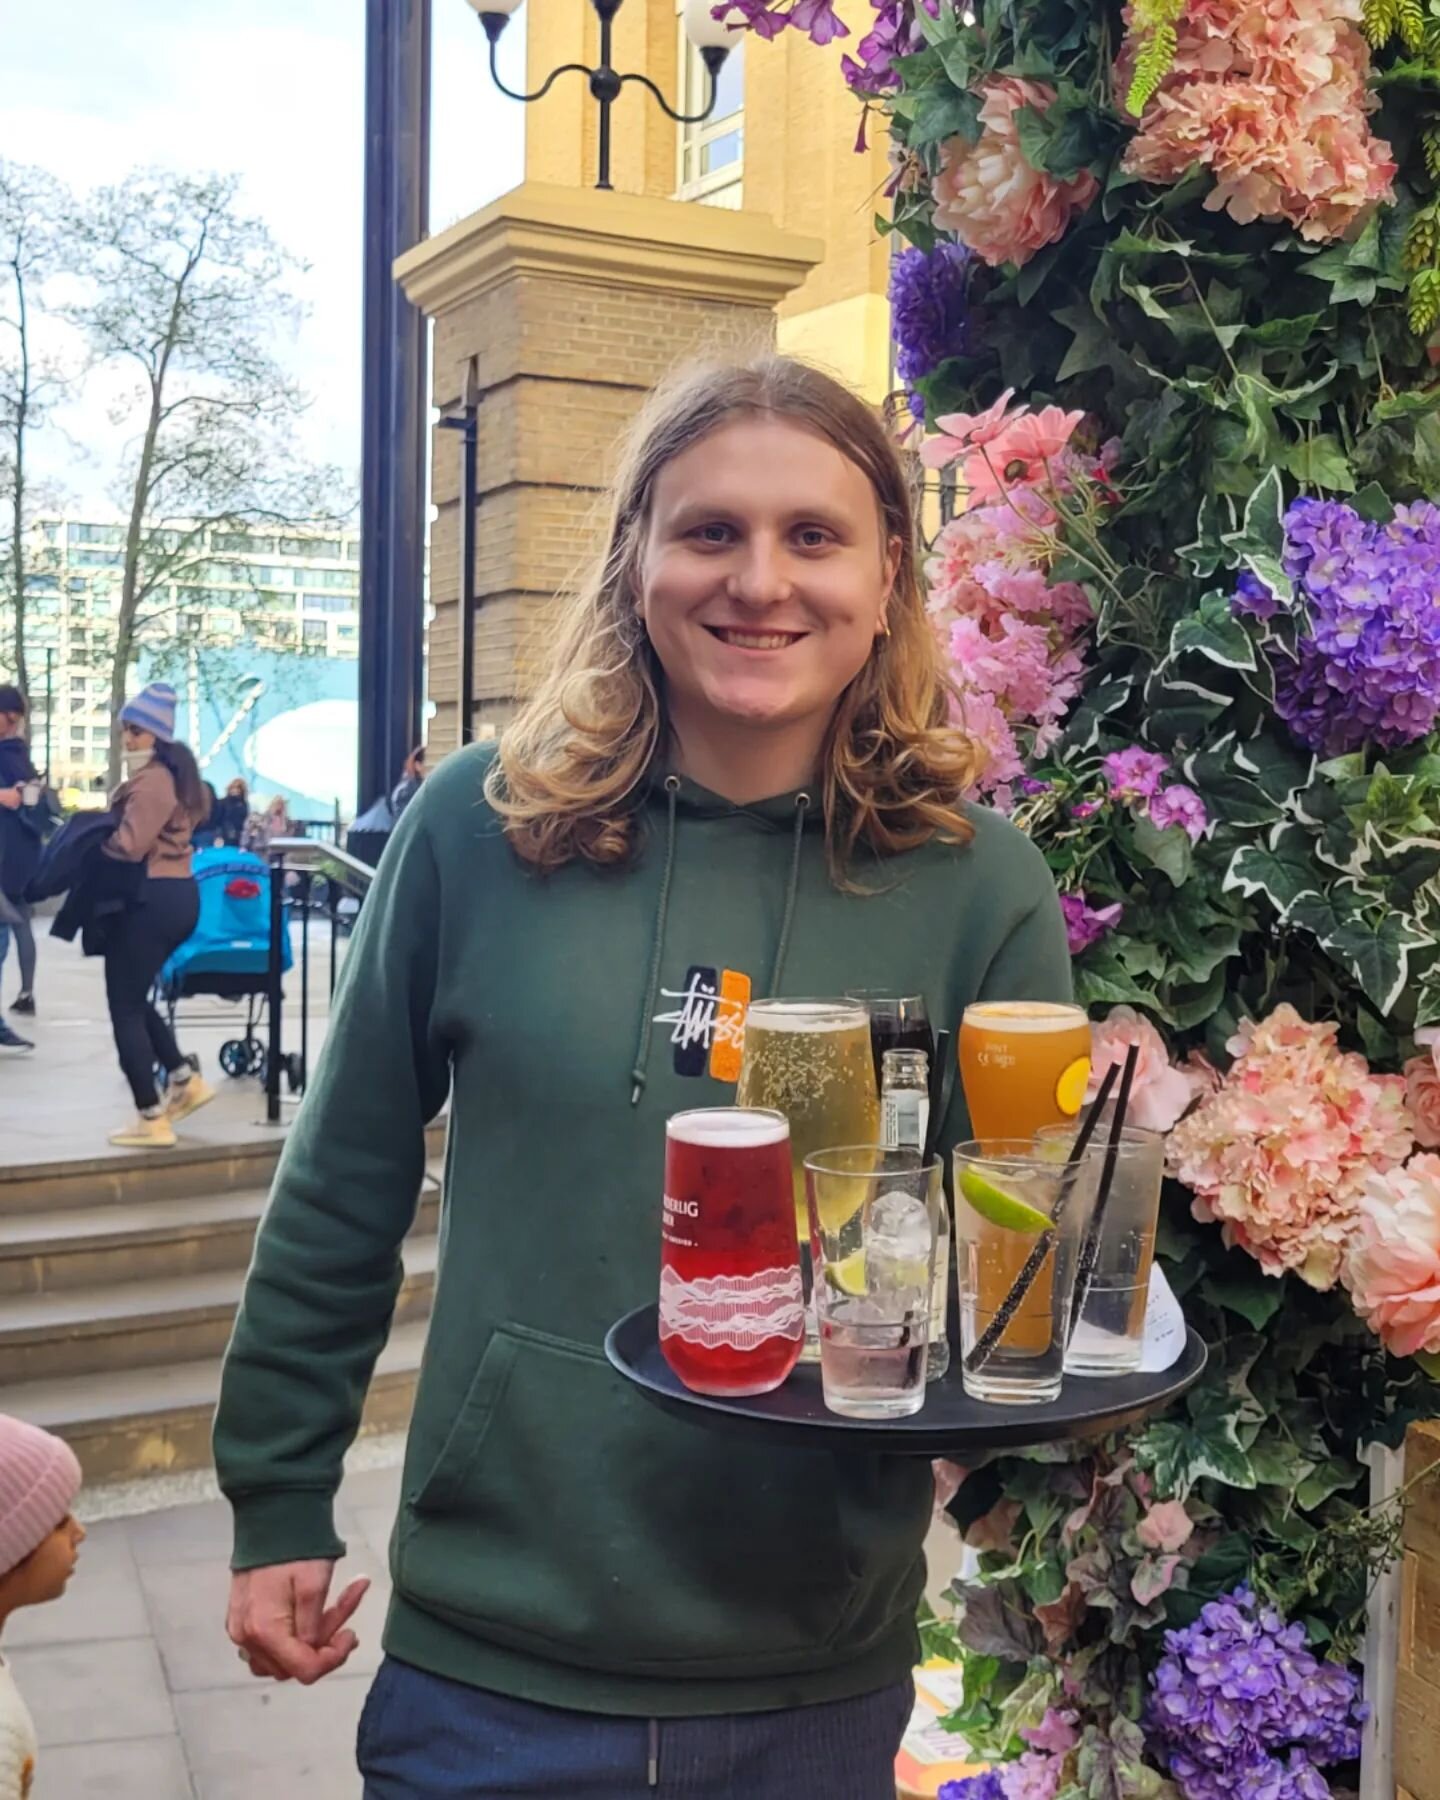 Meet The Team Monday 💥 Here's one of our manager's Will 🙌 We asked this True Legend what he recommends on our menu:

&quot;Love an Aperol Spritz after work especially now spring's here&quot; 🍊☀️

&amp; to eat?
&quot;Our delicious Nice n Spicy pizz